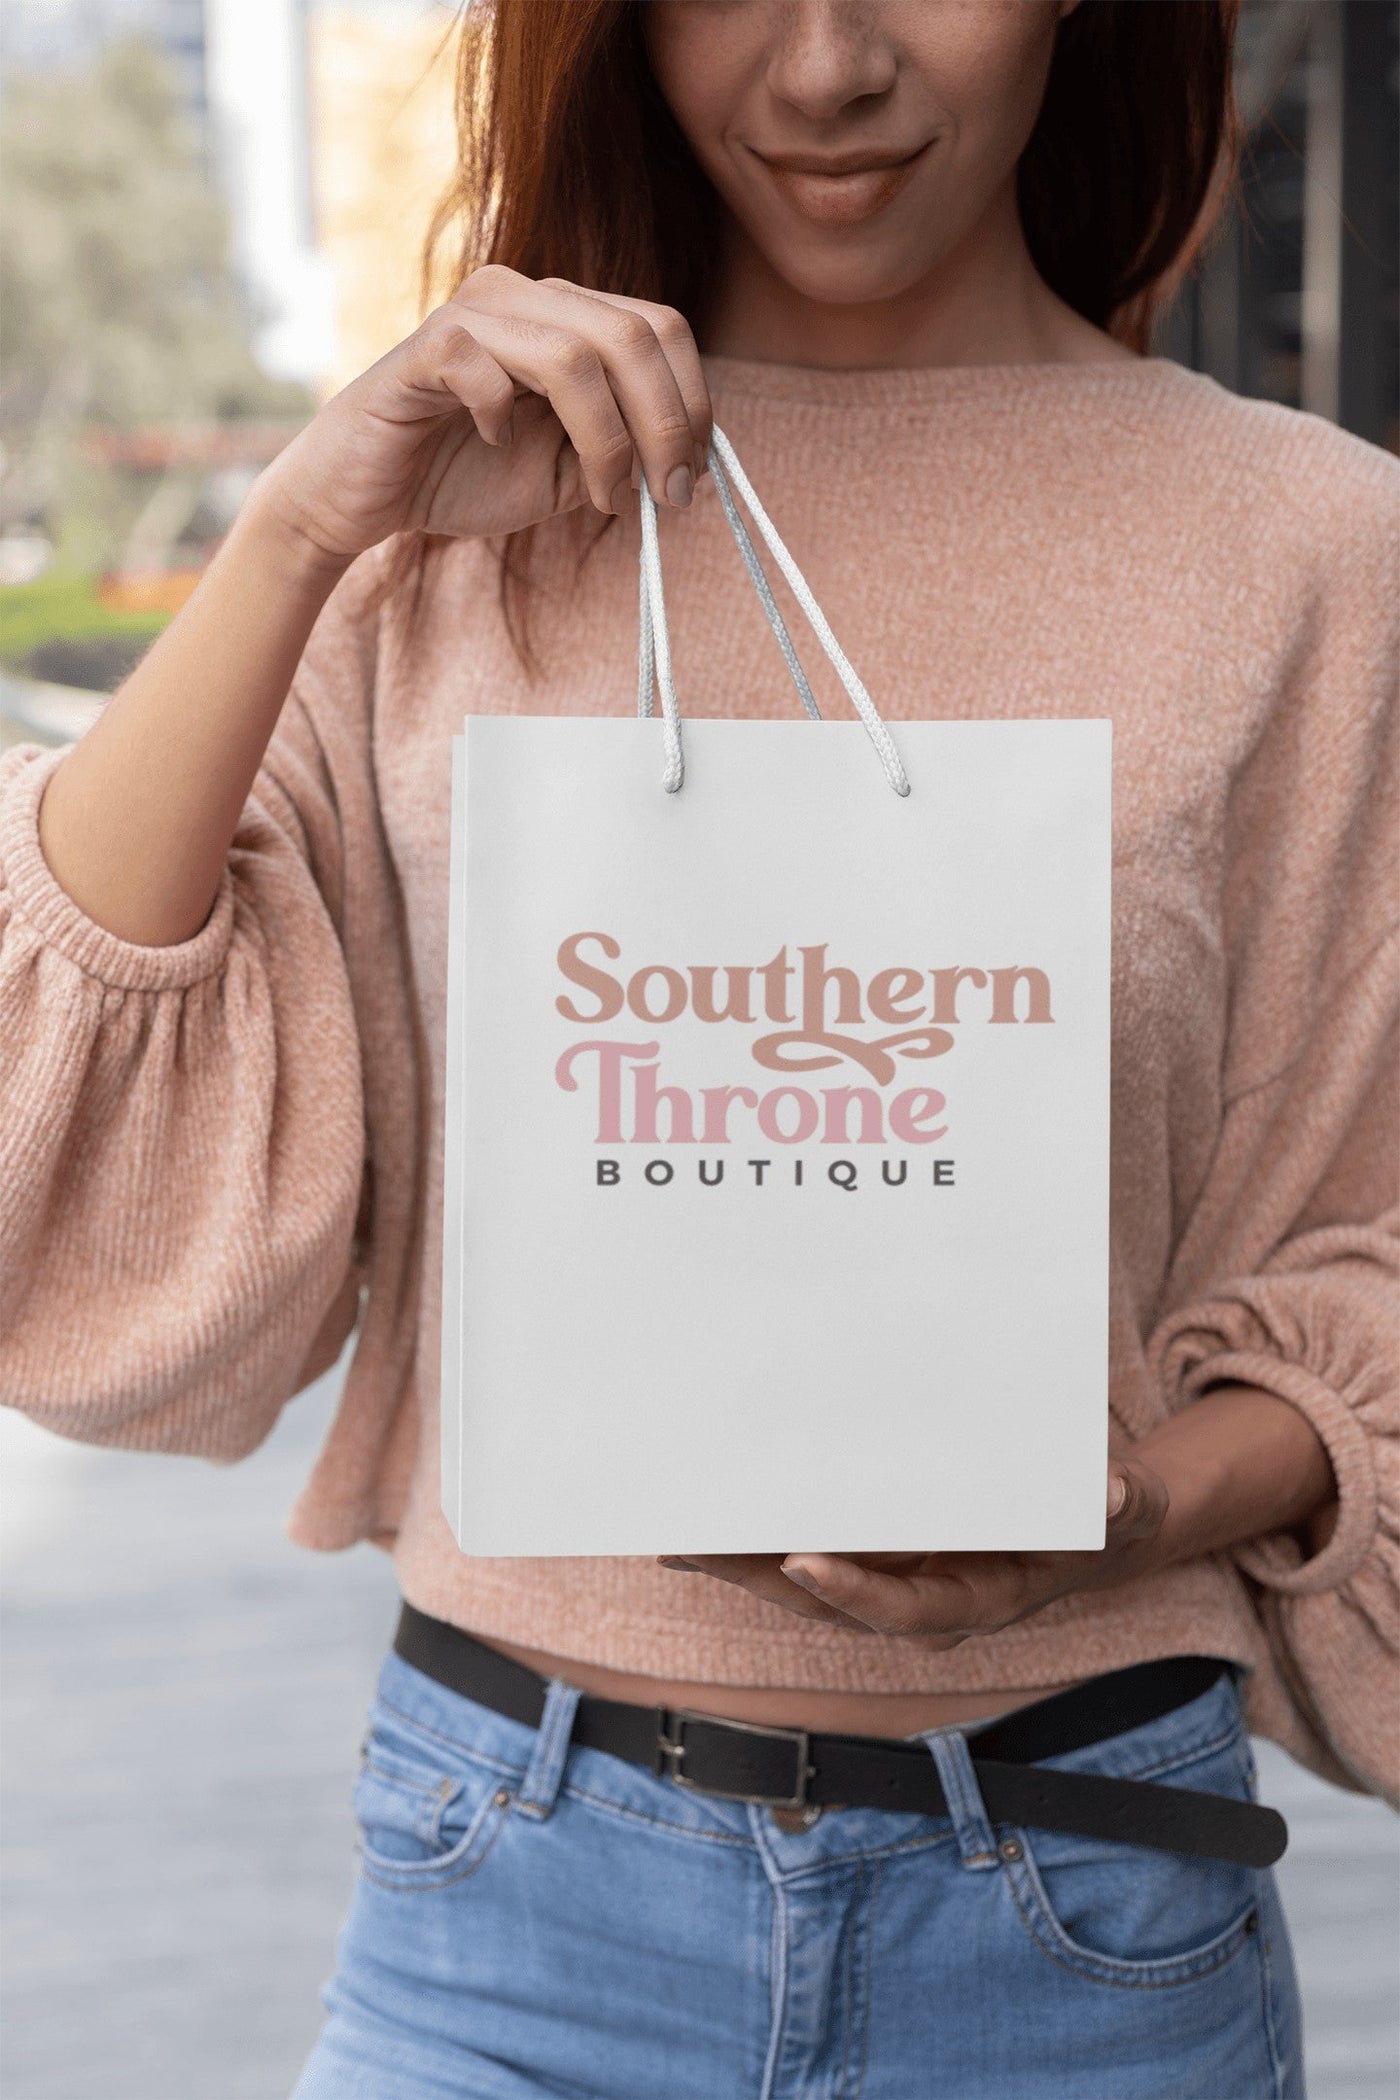 Southern Throne Gift Card Southern Throne Boutique